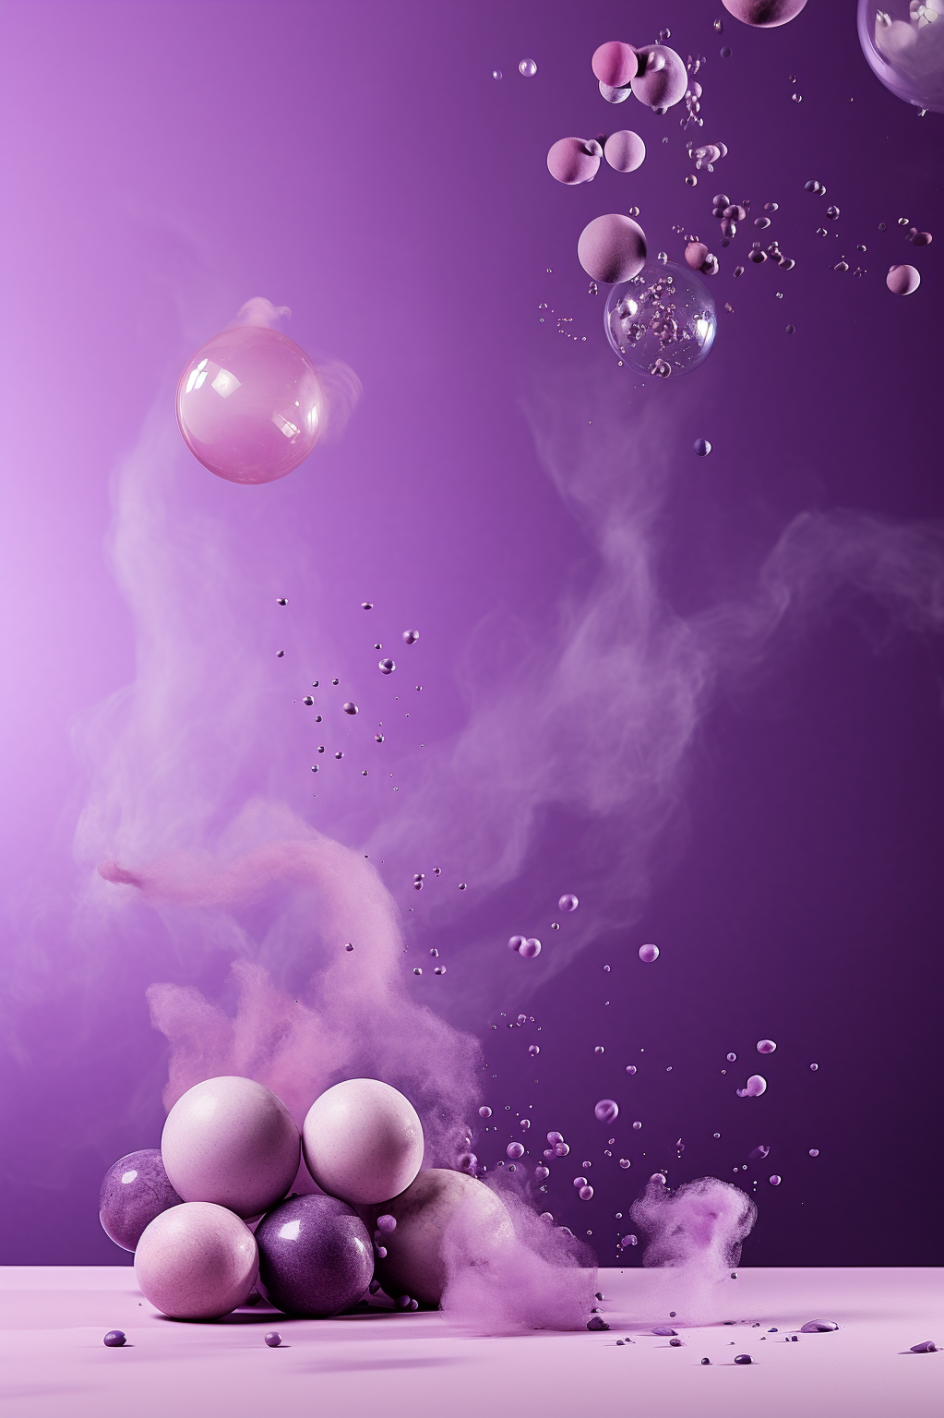 phengrant_purple_backdrop_with_bounching_minimalist_spheres_and_15bb21a1-2150-4754-827d-6604a4503bd9.png